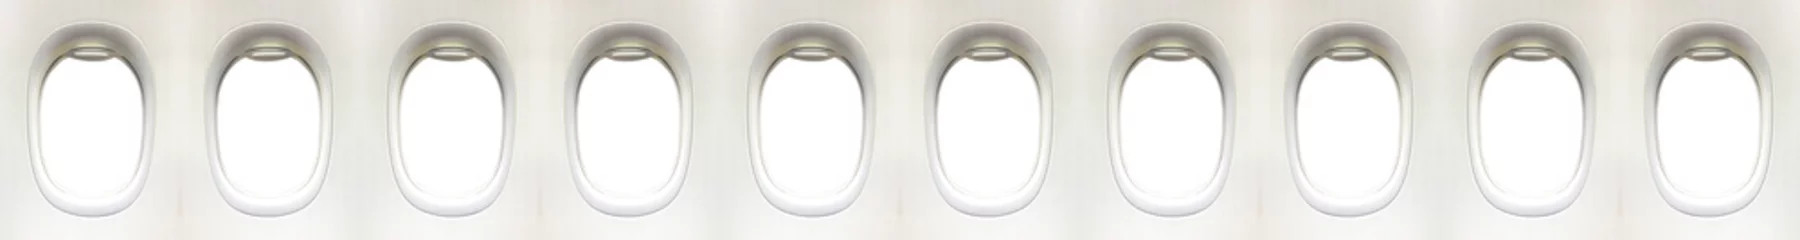 Rideaux occultants Avion Airplane window and space for your design, clipping path